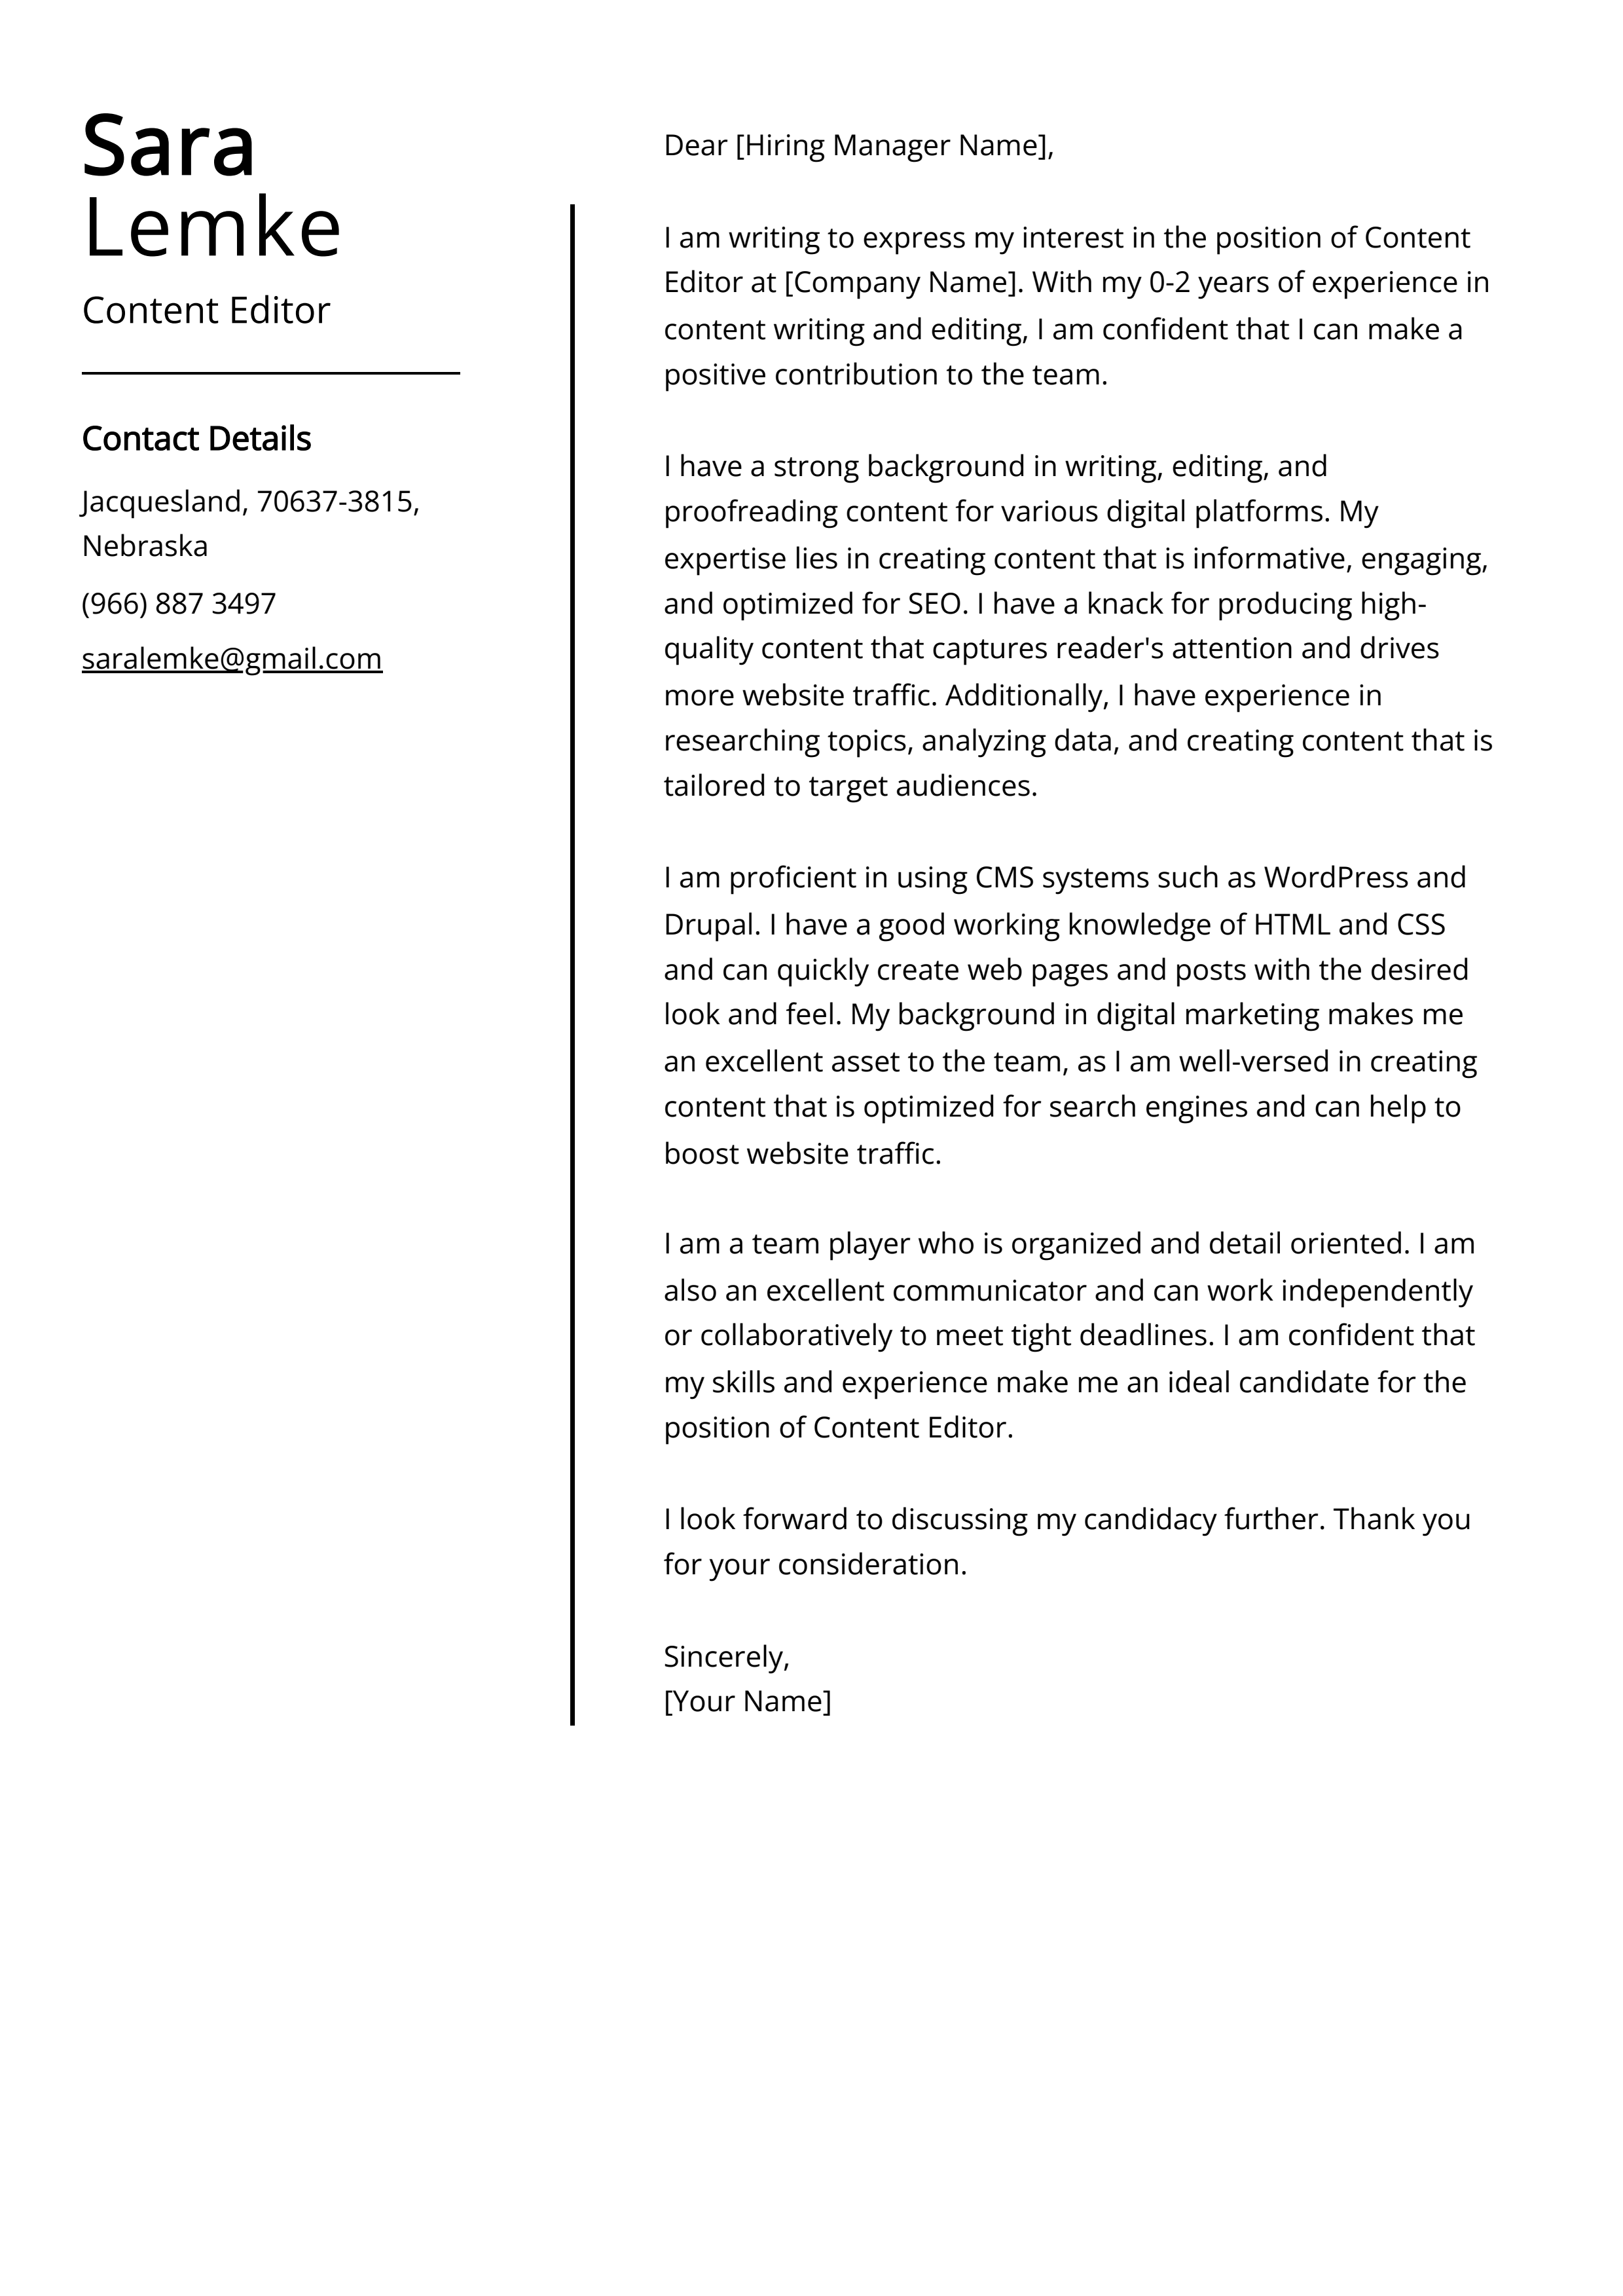 Content Editor Cover Letter Example